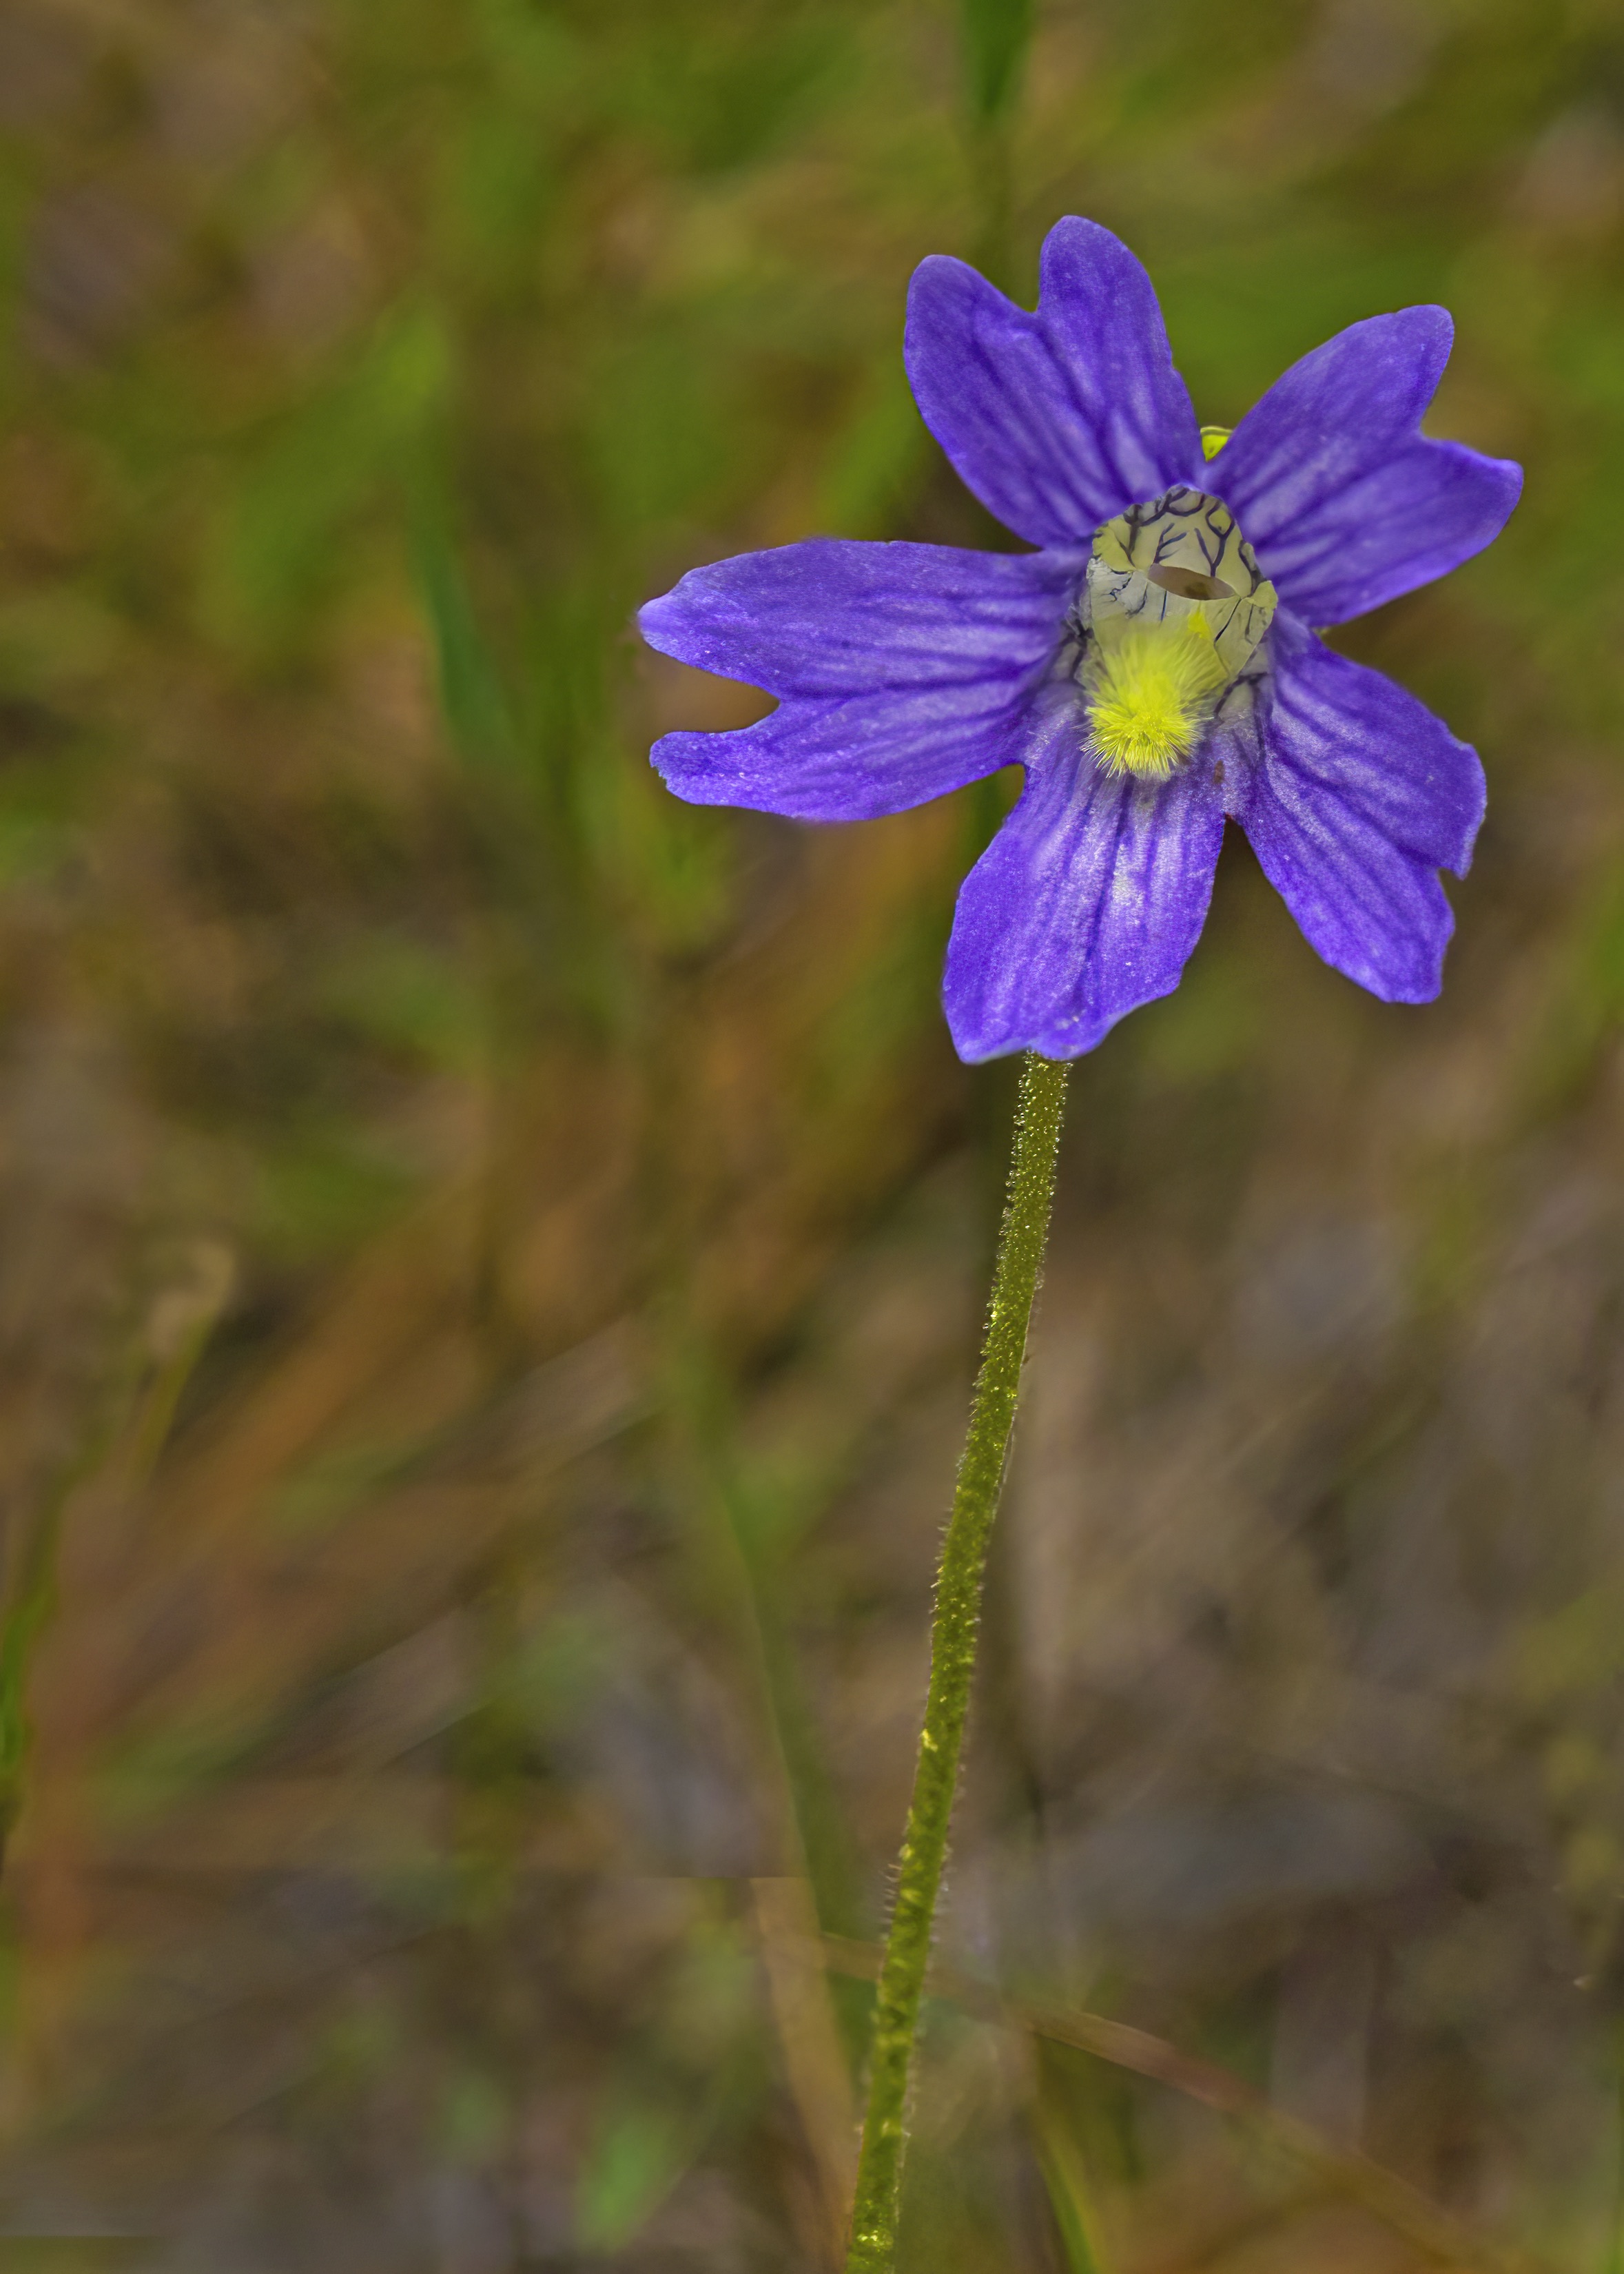 The Scientific Name is Pinguicula caerulea. You will likely hear them called Blue Butterwort, Blueflower Butterwort. This picture shows the  of Pinguicula caerulea